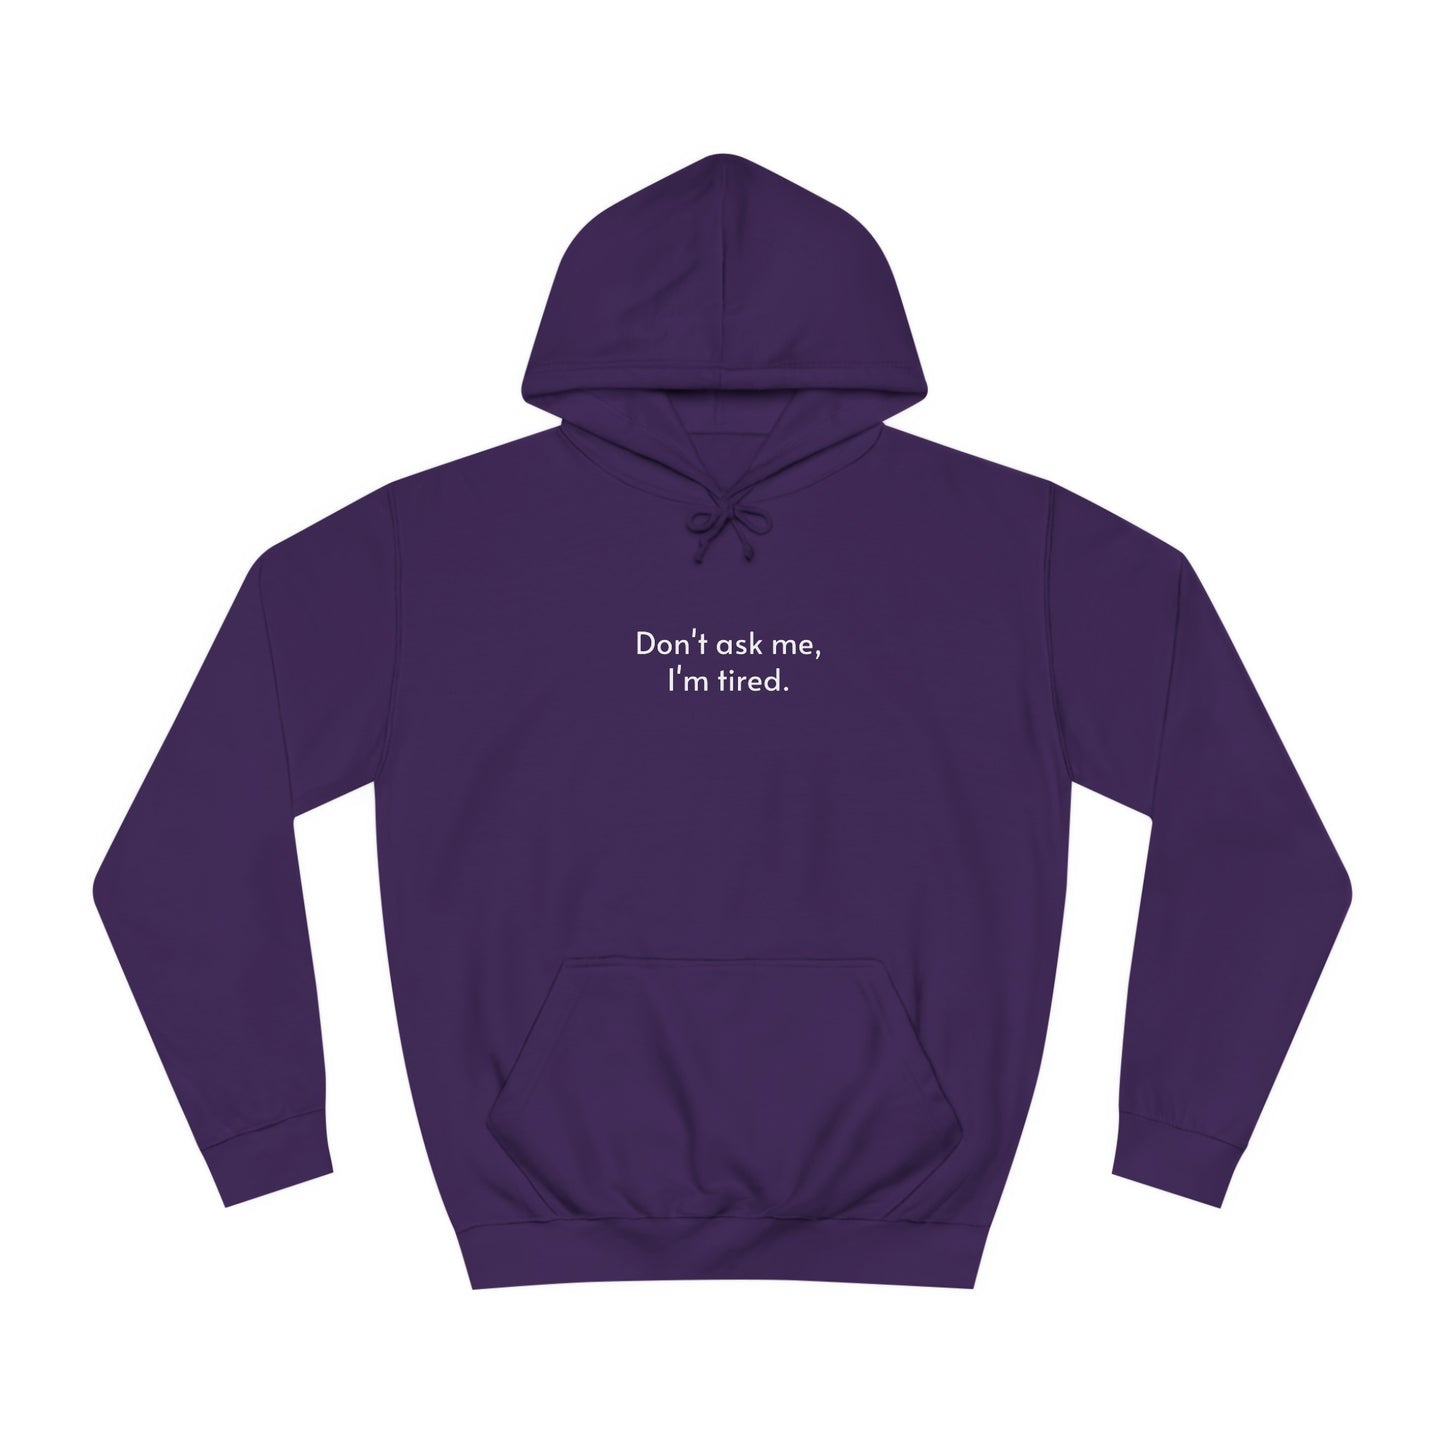 Don't ask me, I'm tired hoodie